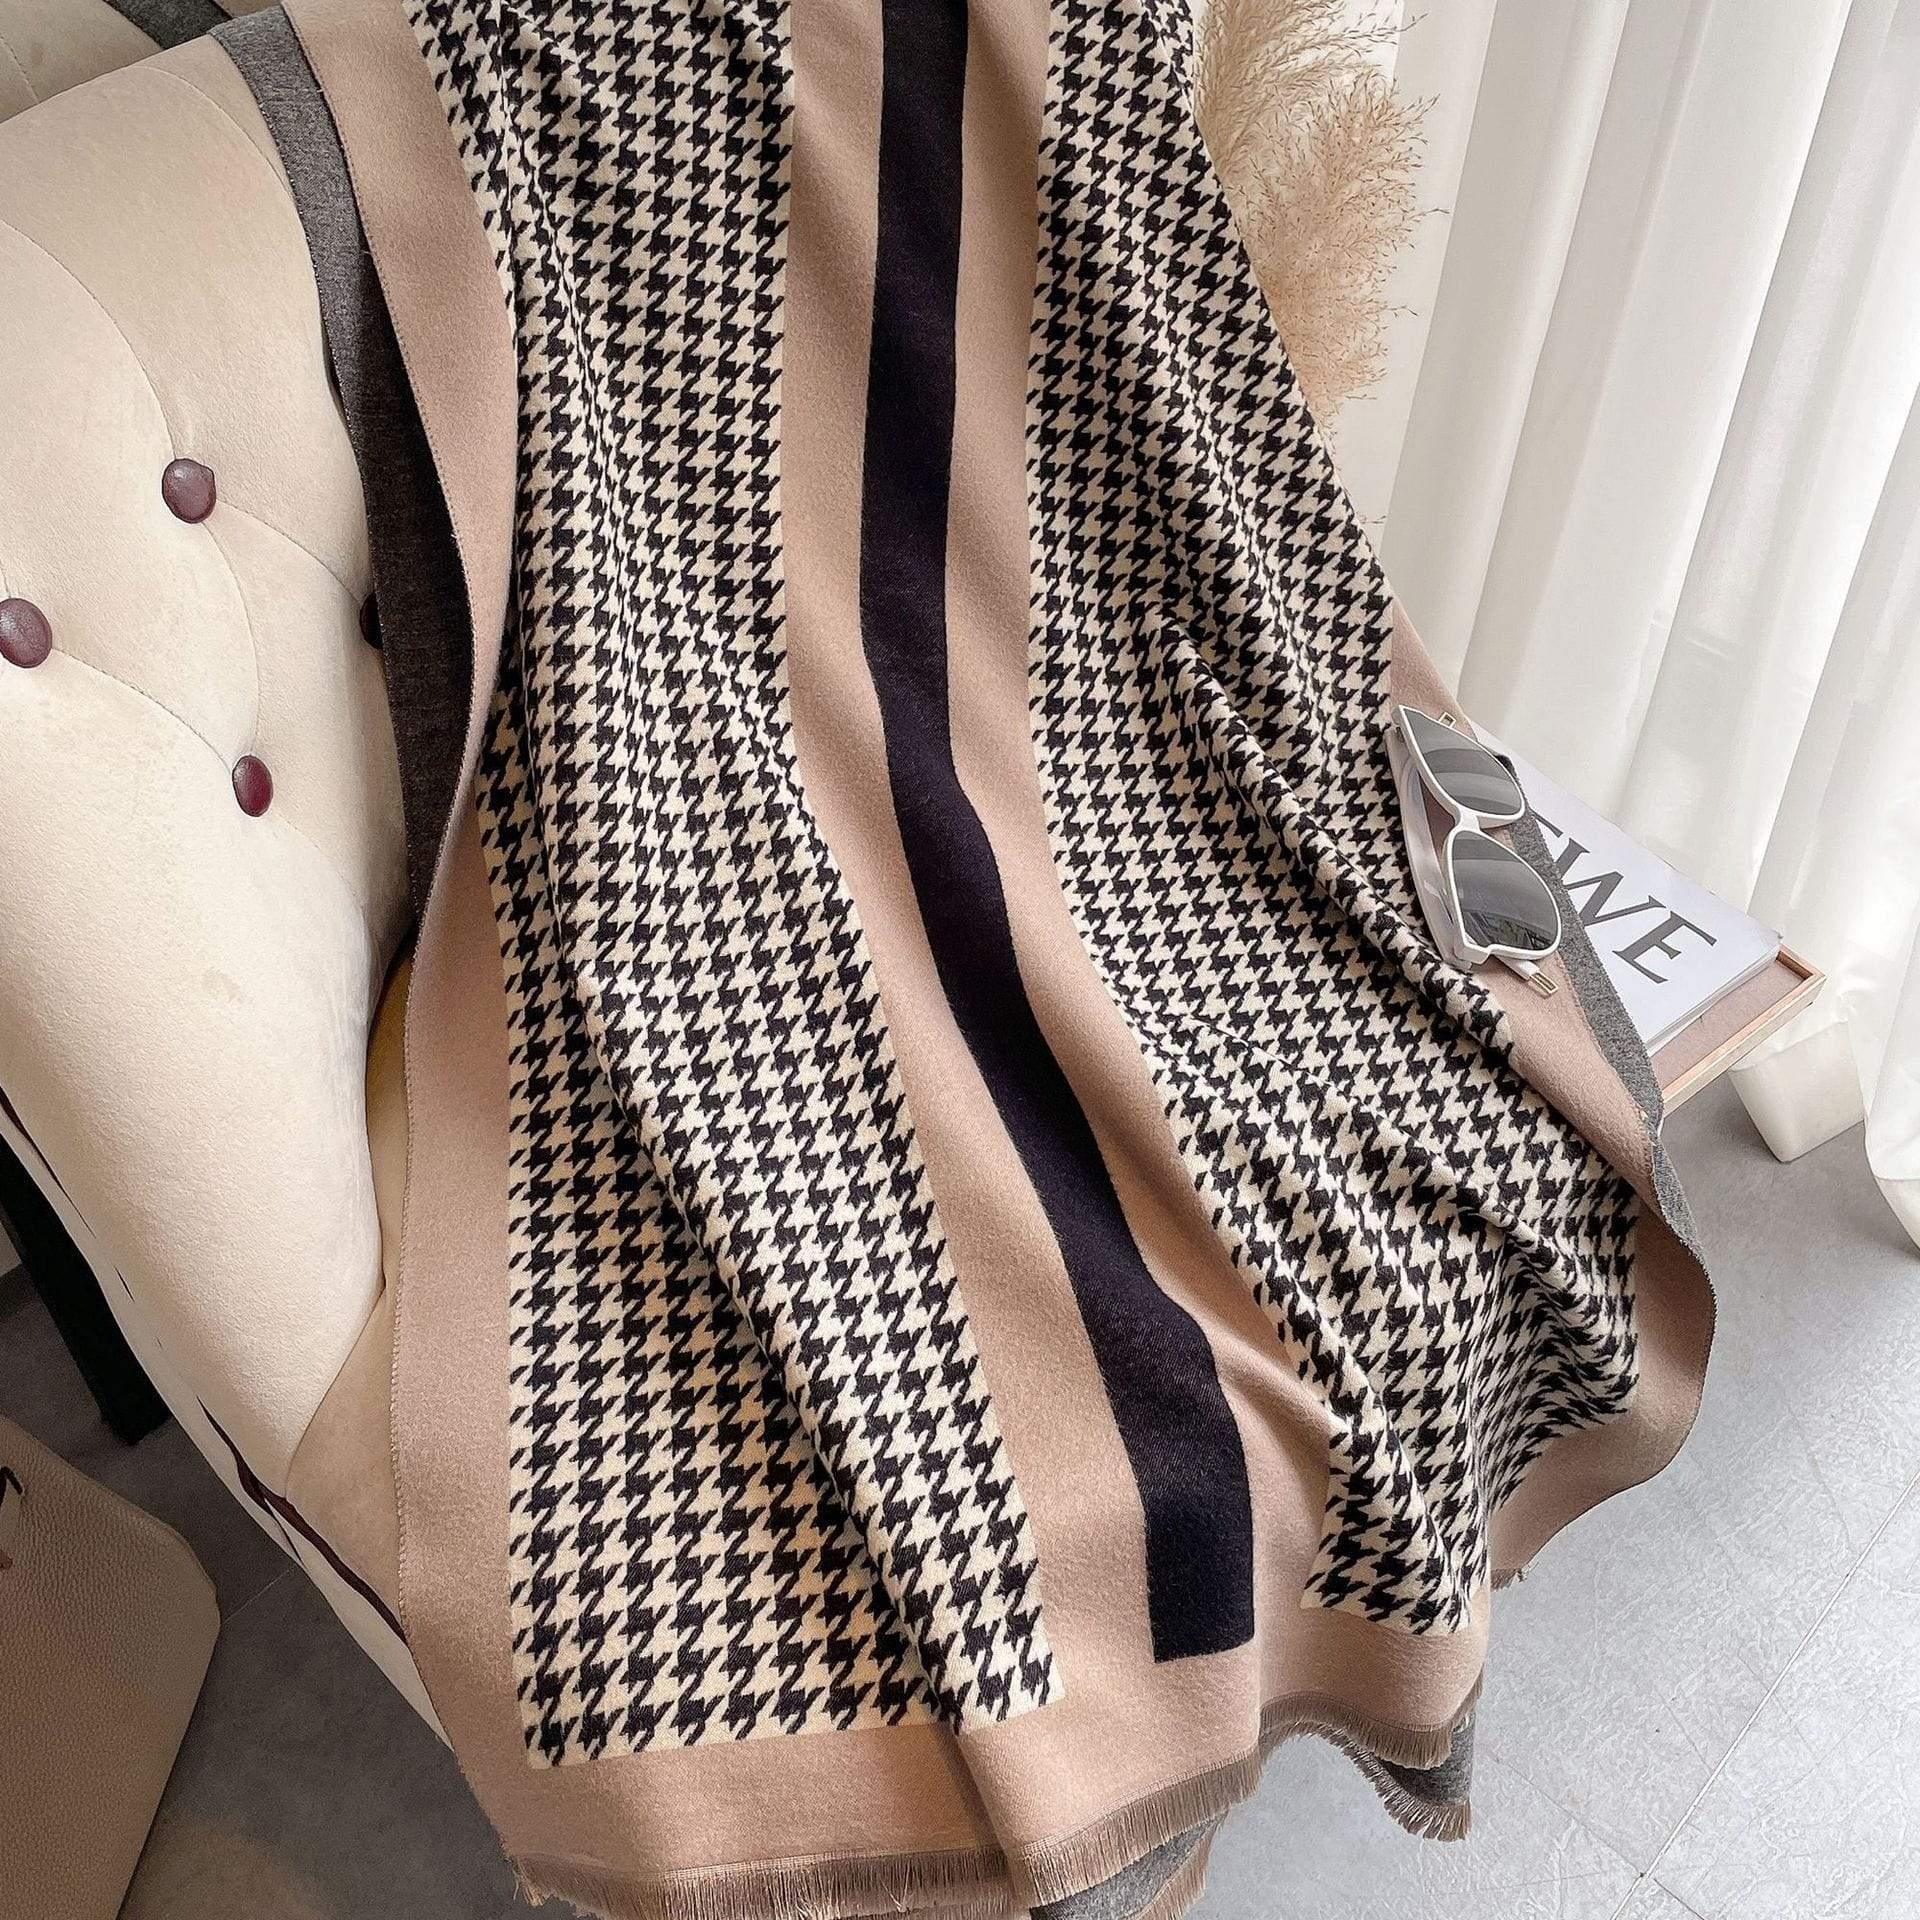 Shop 0 Thick Warm Winter Scarf Houndstooth Design Print Women Cashmere Pashmina Shawl Lady Wrap Scarves Knitted Female Foulard Blanket Mademoiselle Home Decor